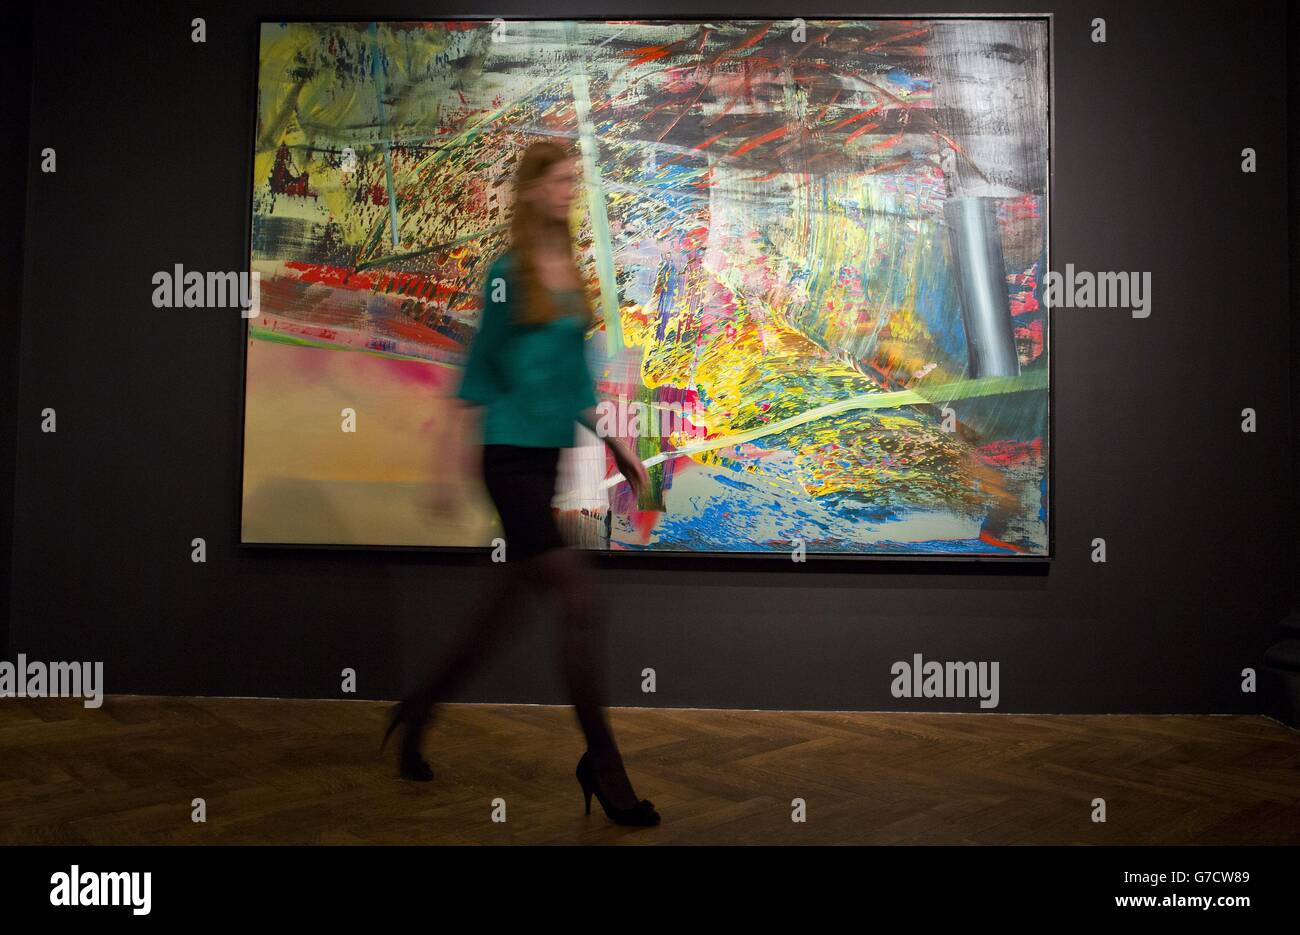 A gallery assistant passes by 'Netz', 1985 by Gerhard Richter and estimated at £7m - £10m which forms part of 44 major post-war artworks from the Essl collection due to go on sale at Christie's Mayfair in London on October 13. Stock Photo